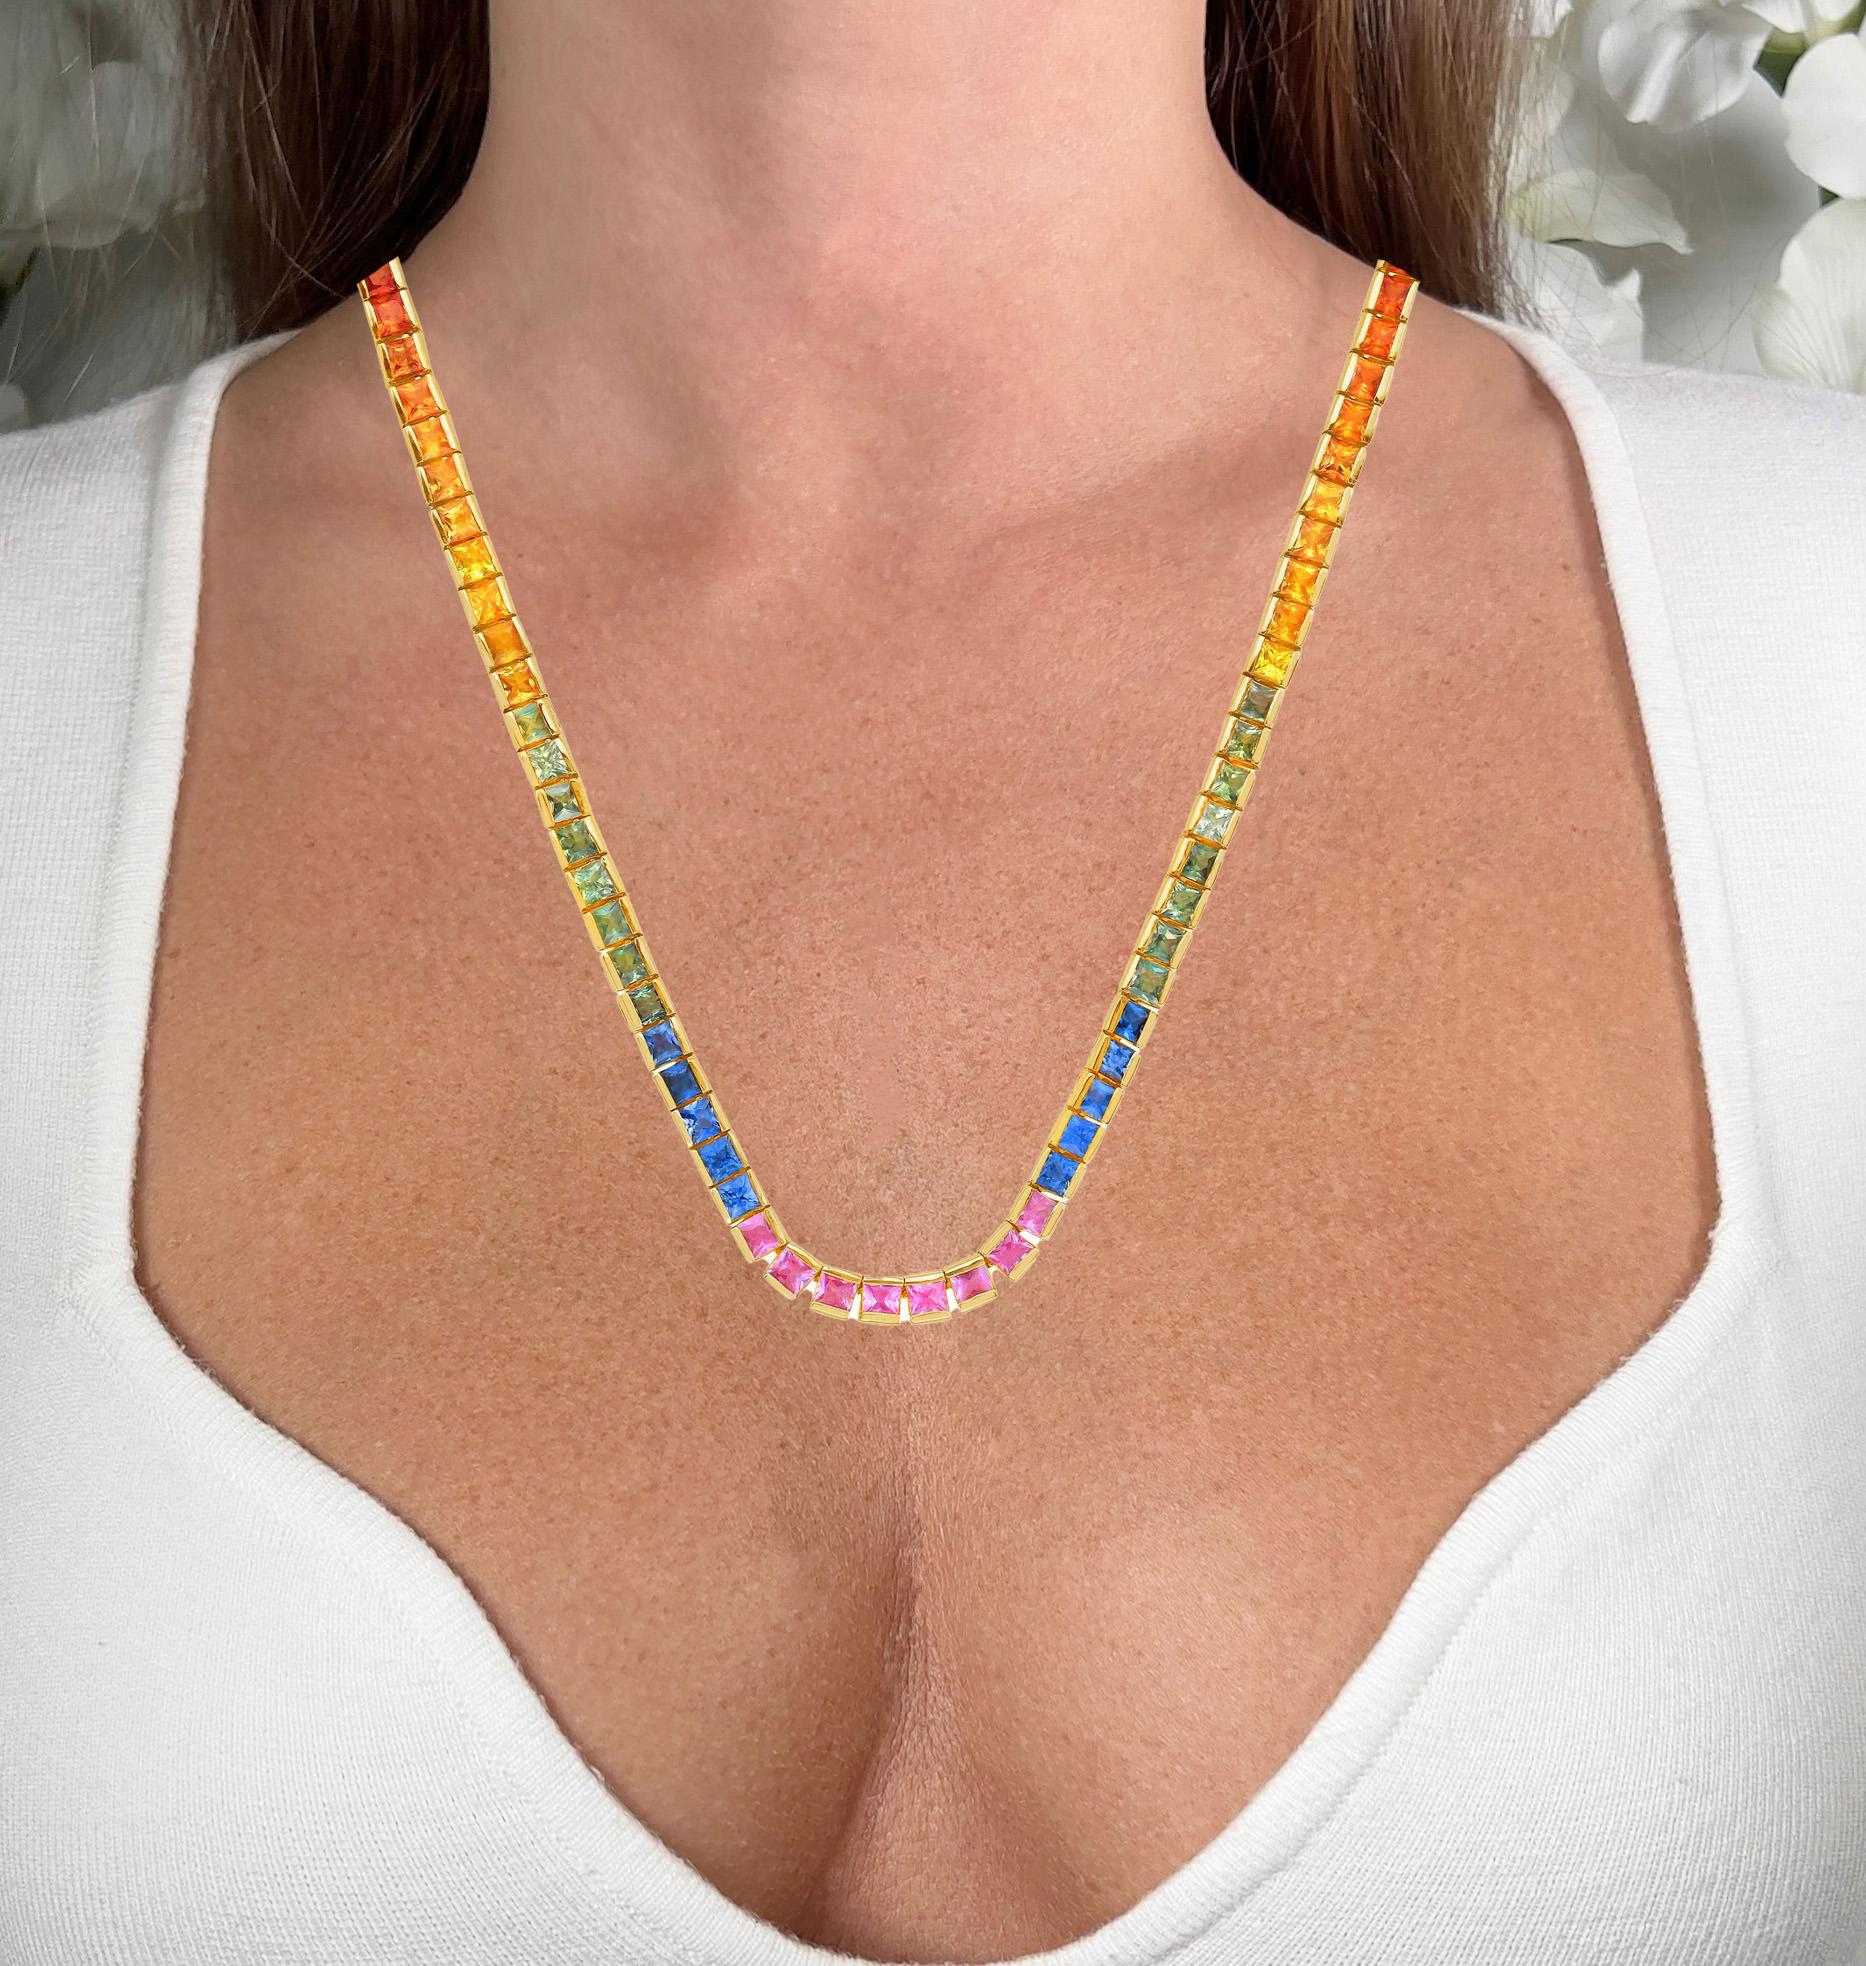 It comes with the Gemological Appraisal by GIA GG/AJP
All Gemstones are Natural
130 Multicolor Sapphires = 19.45 Carats
Cut: Princess
Metal: 14K Yellow Gold
Necklace Length: 18 Inches